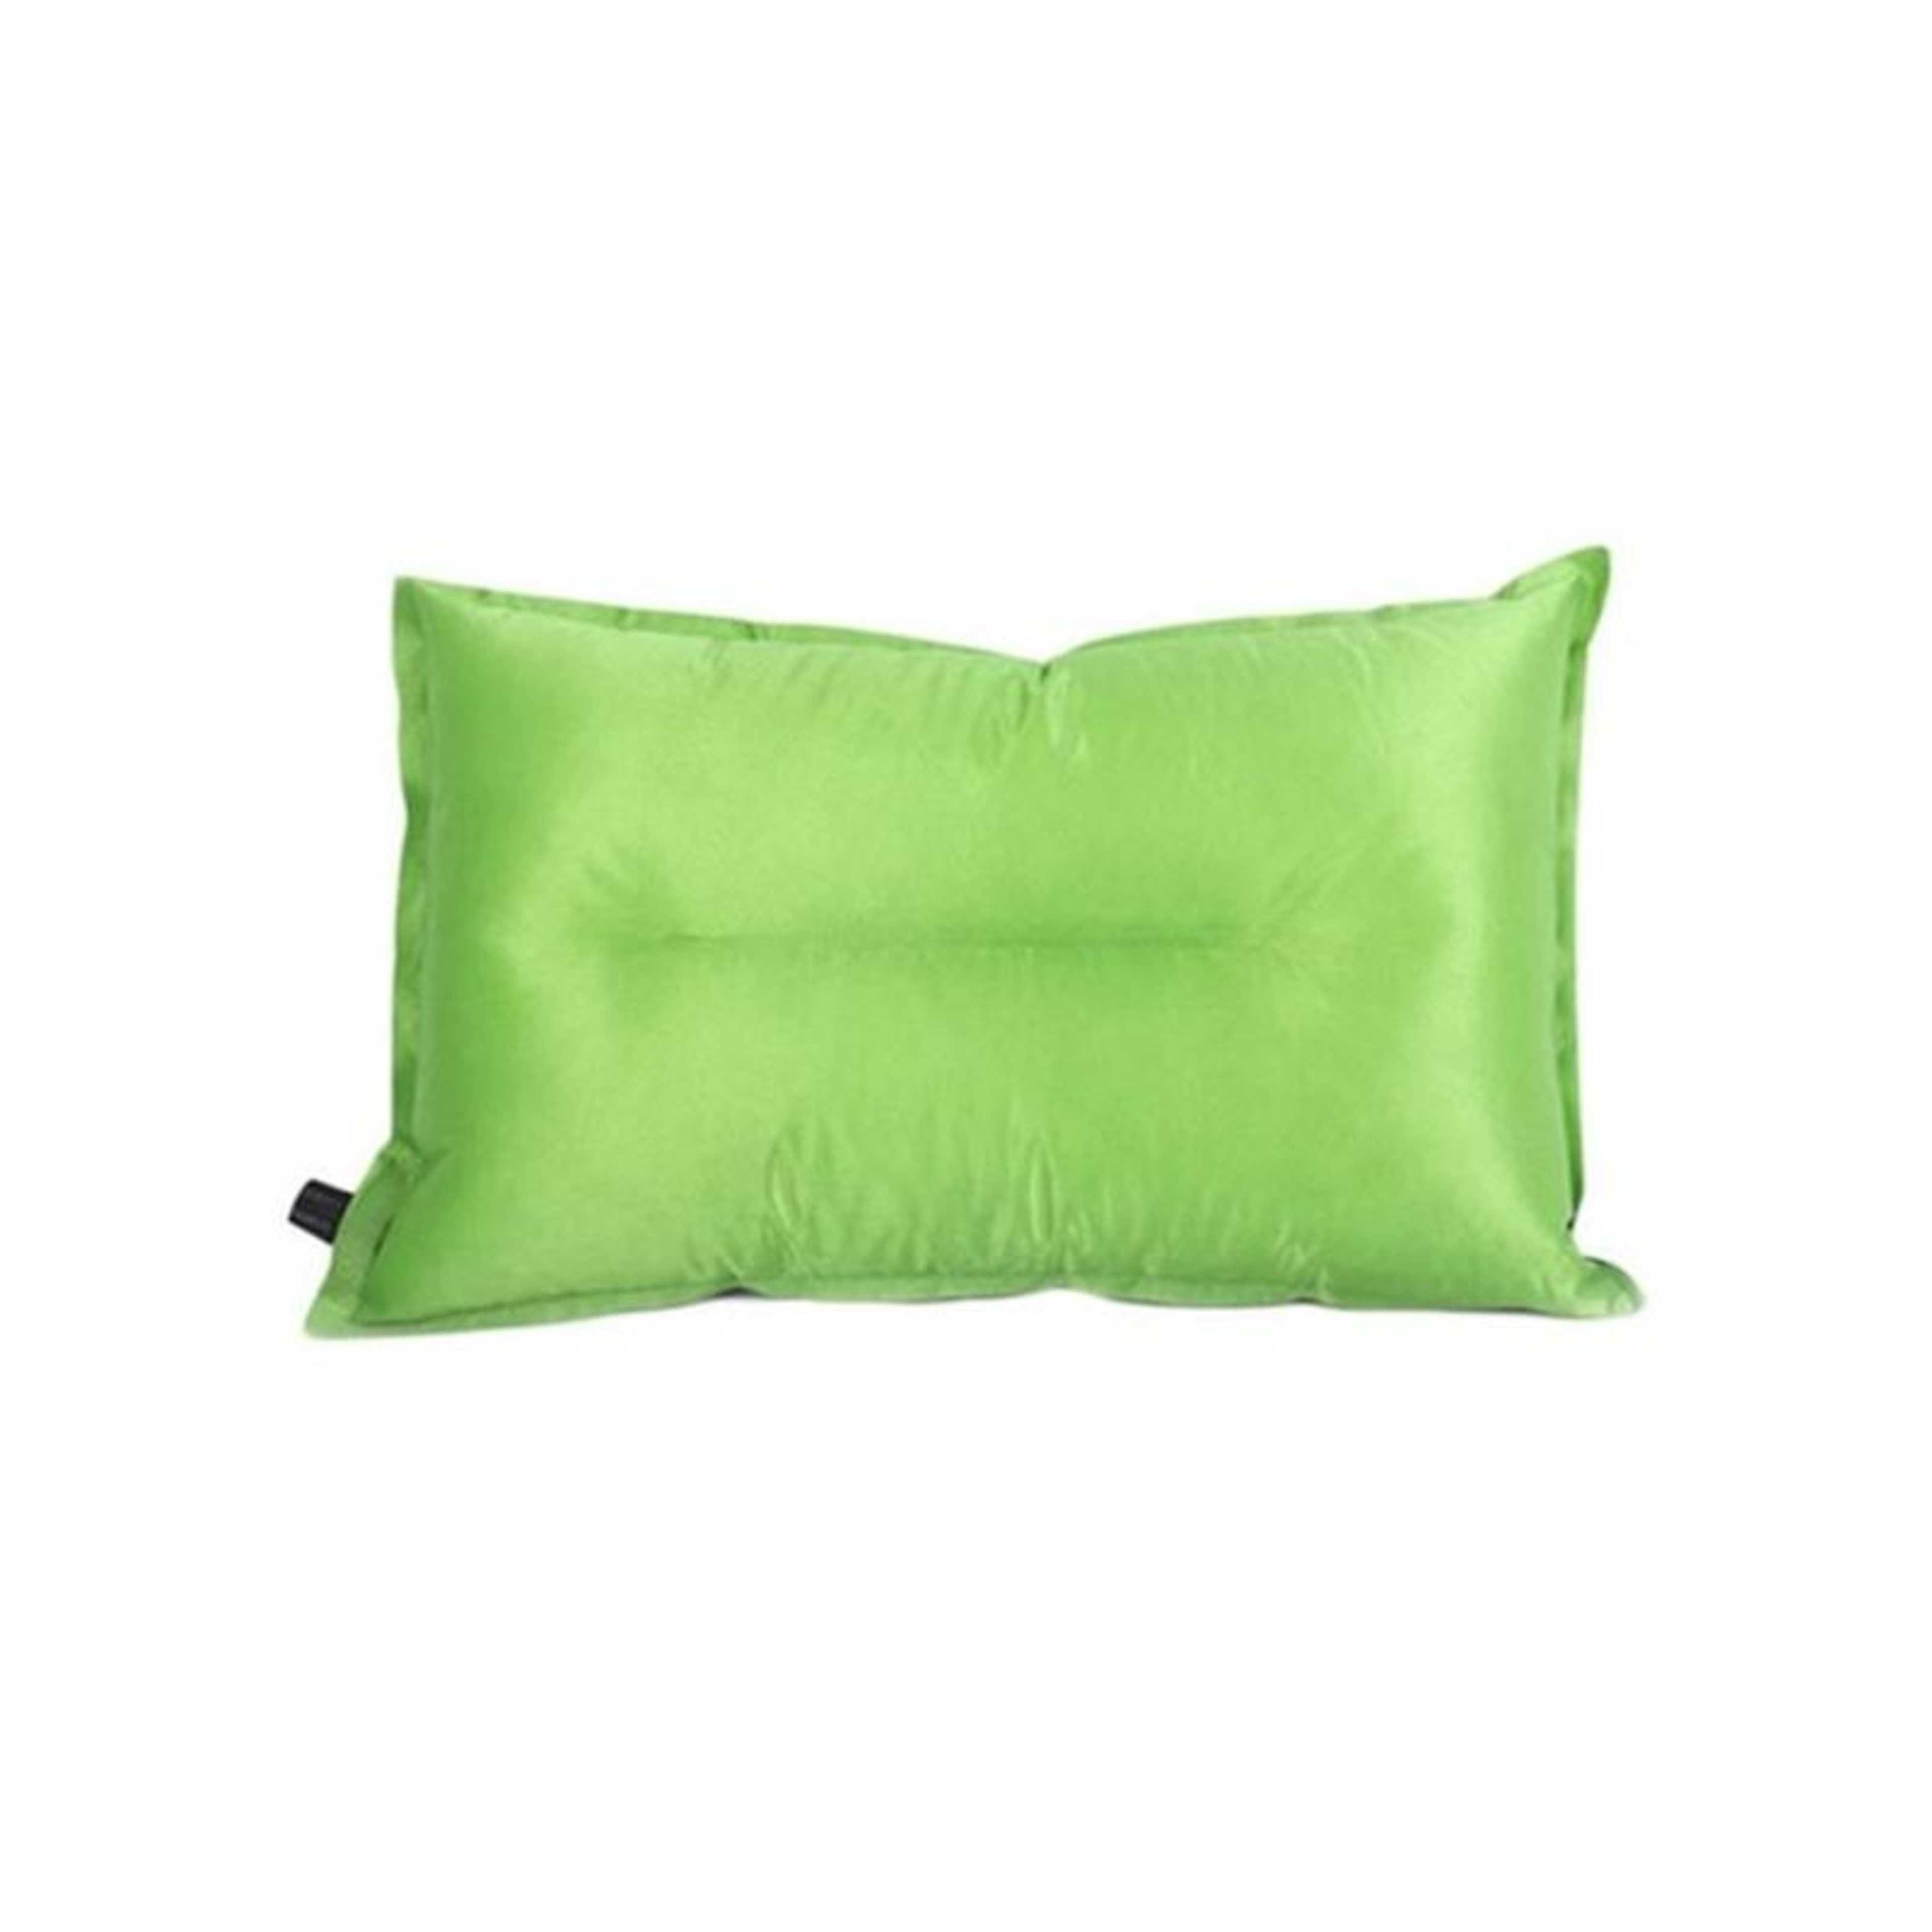 Automatic Inflatable Pillow Air Cushion for Hiking Backpacking Travel 47x30x8cm Popular New